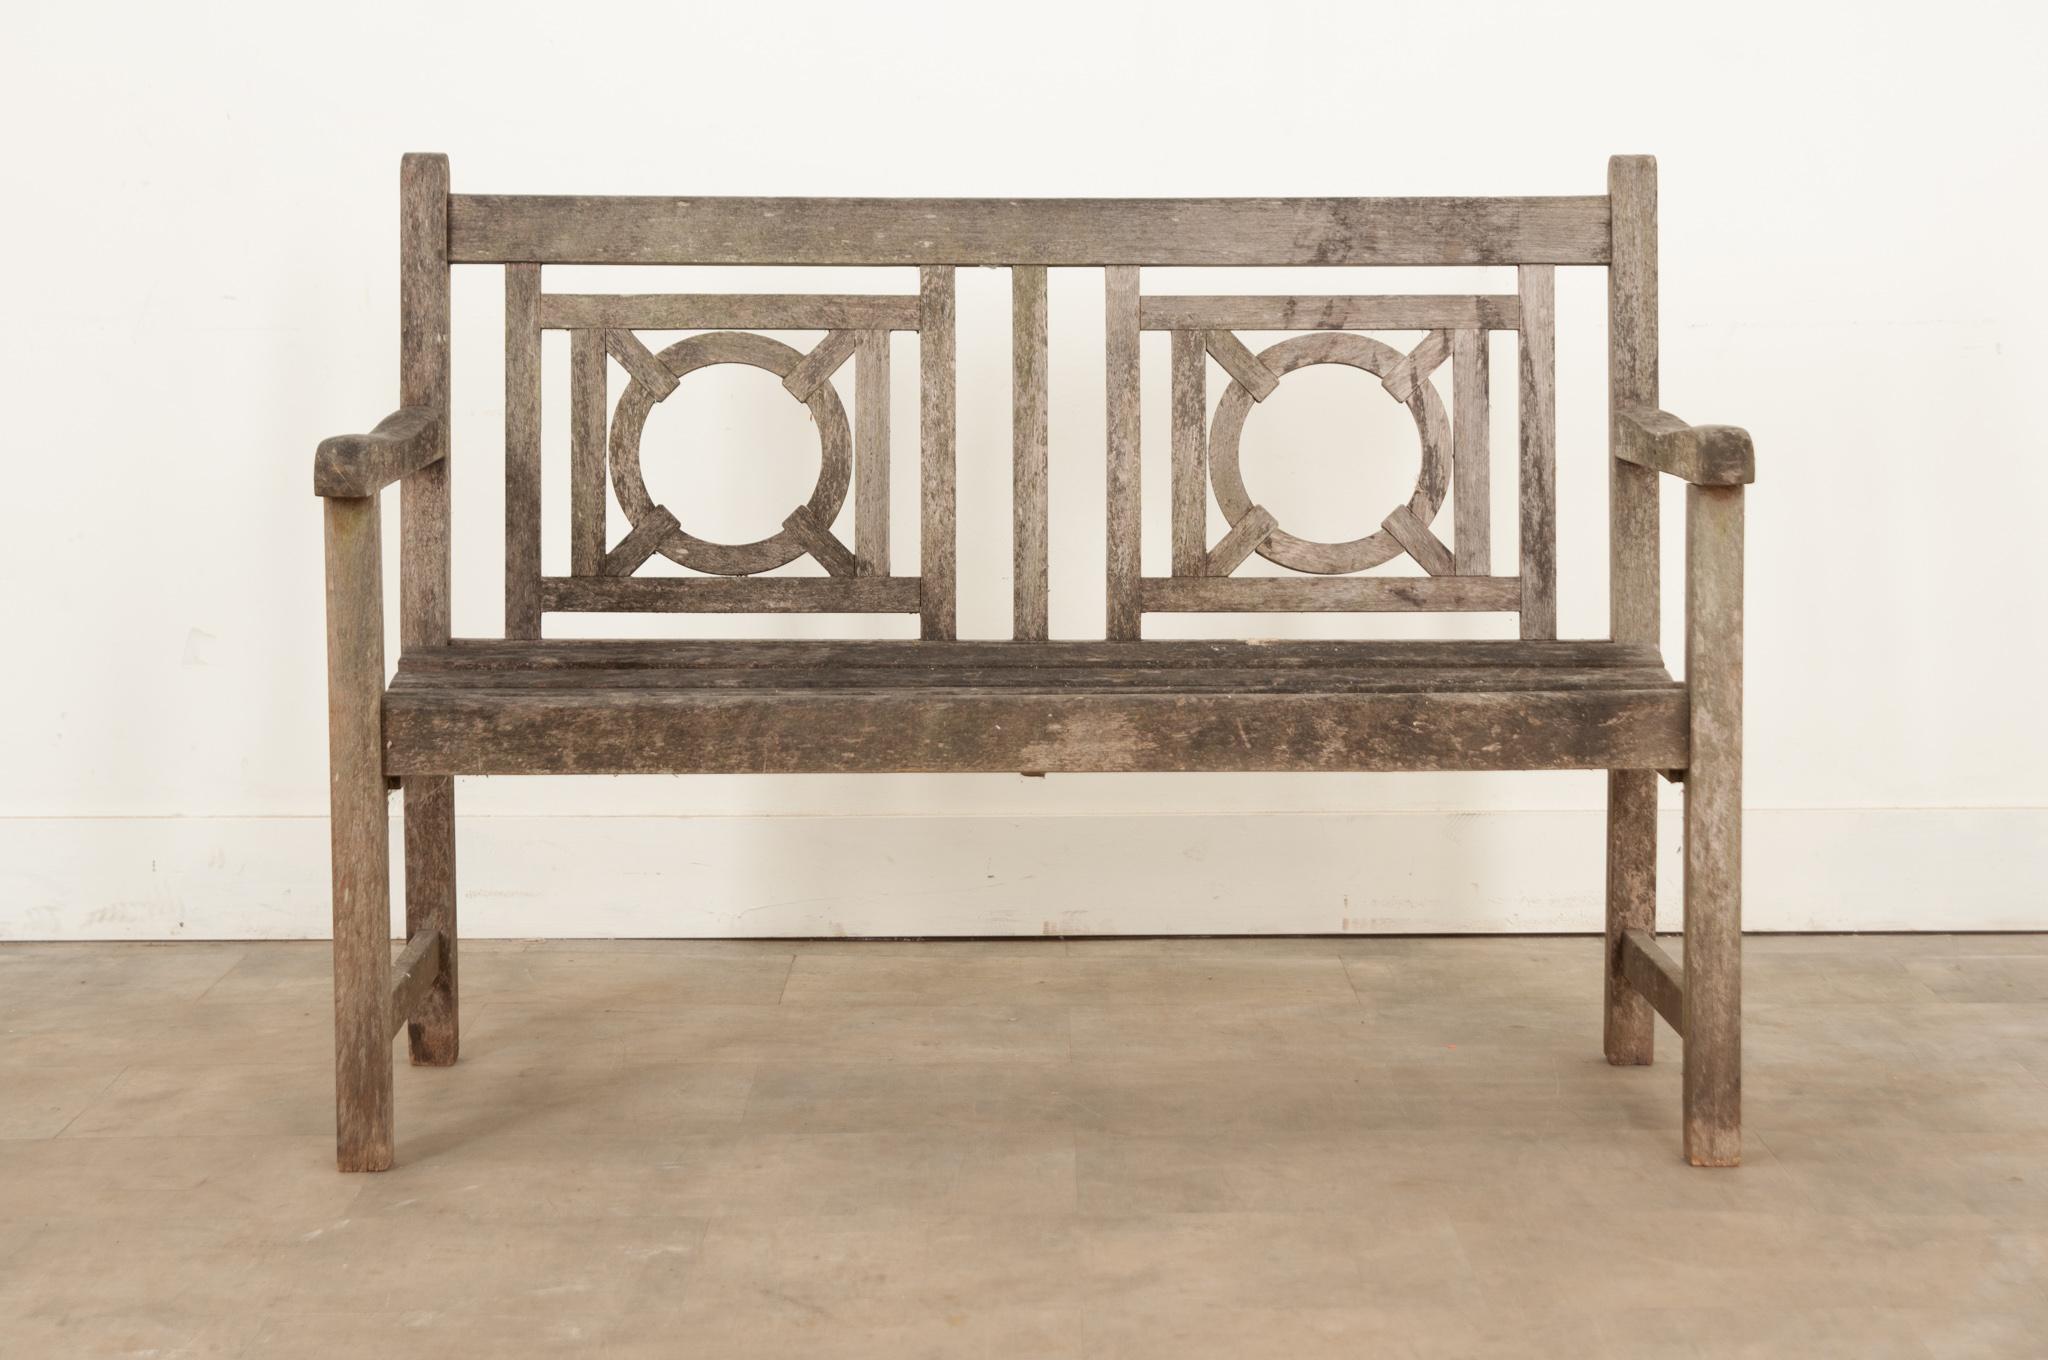 A fine English antique bench hand-crafted in the 19th century of teak wood. This attractive bench features a lovely weathered patina, a carved back, and a comfortable planked seat. The eye is drawn to its interesting geometric design that gives it a